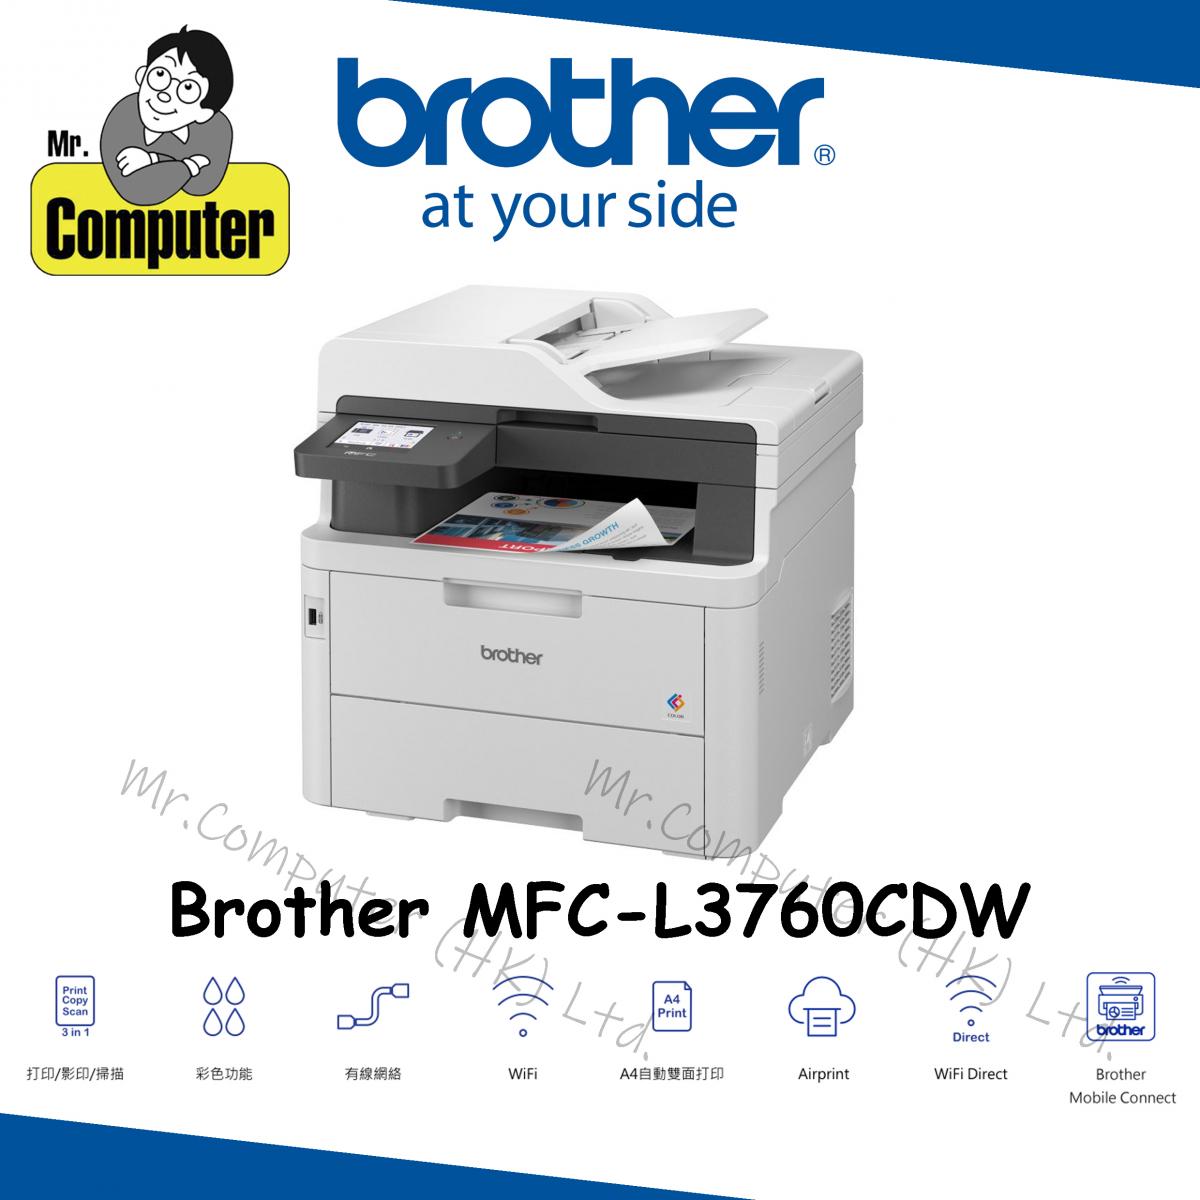 Brother MFC-L3760CDW Manuals